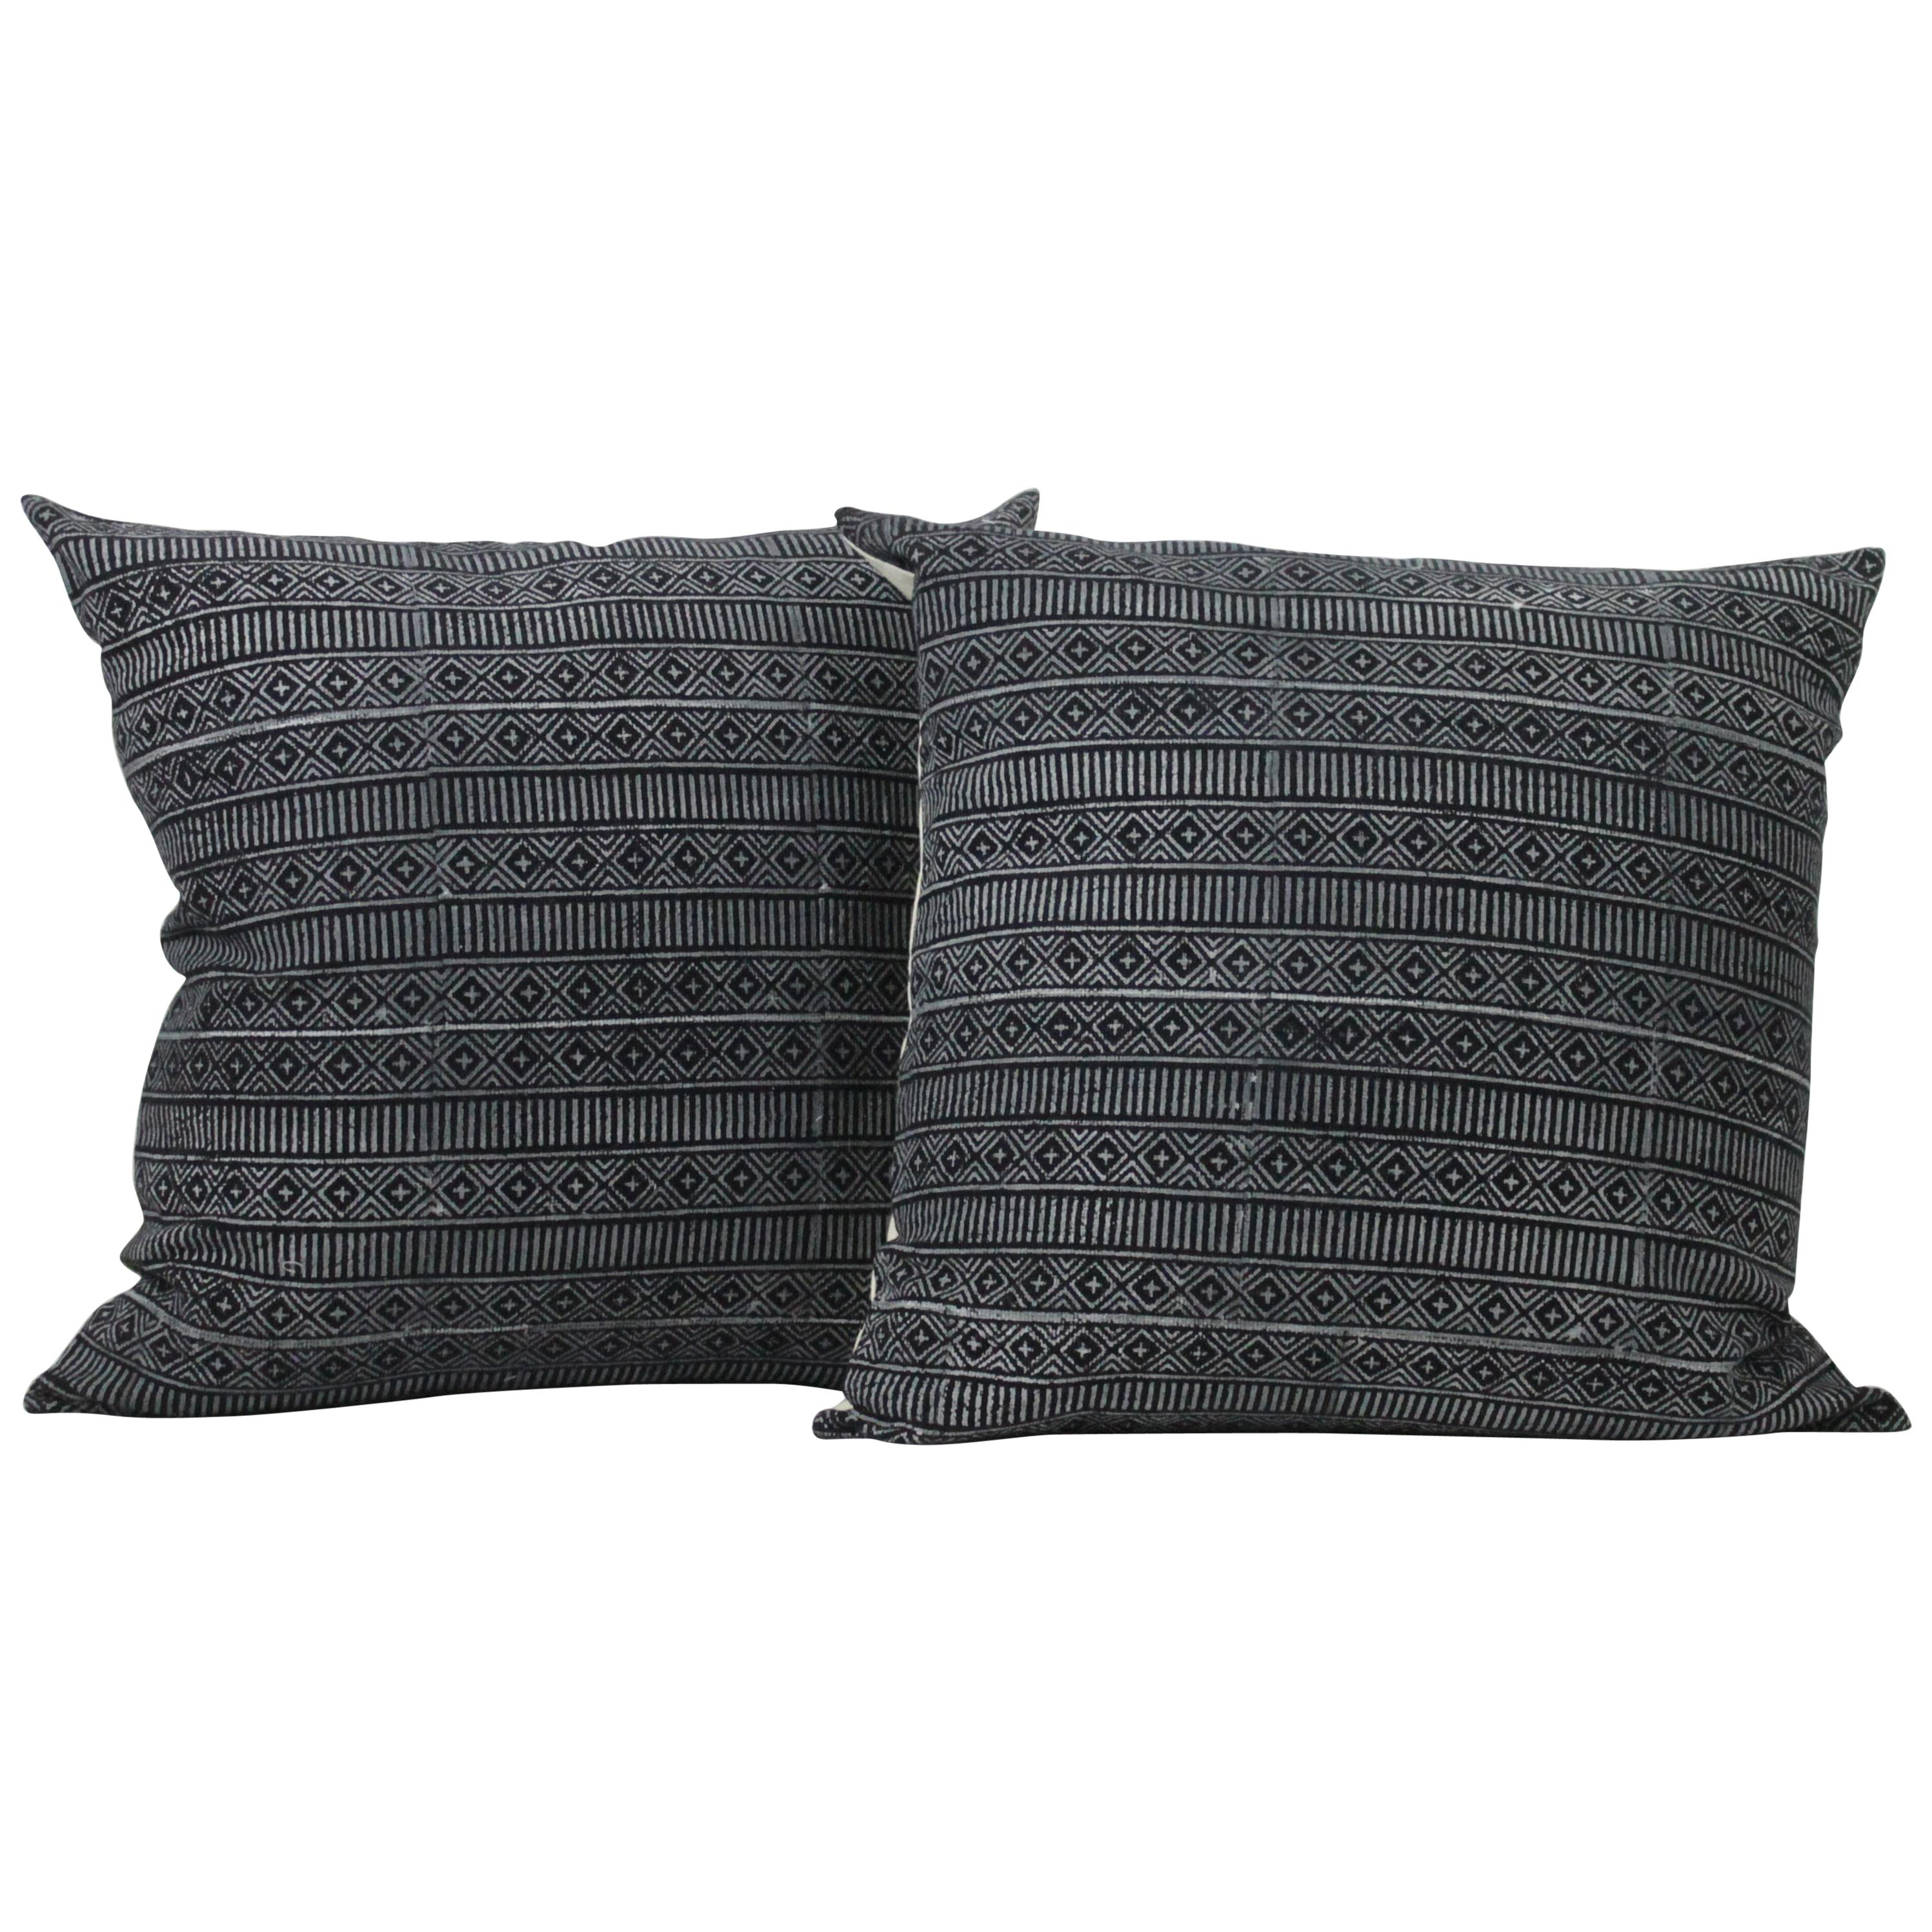 Black and Off-White Geometric Style Pillows